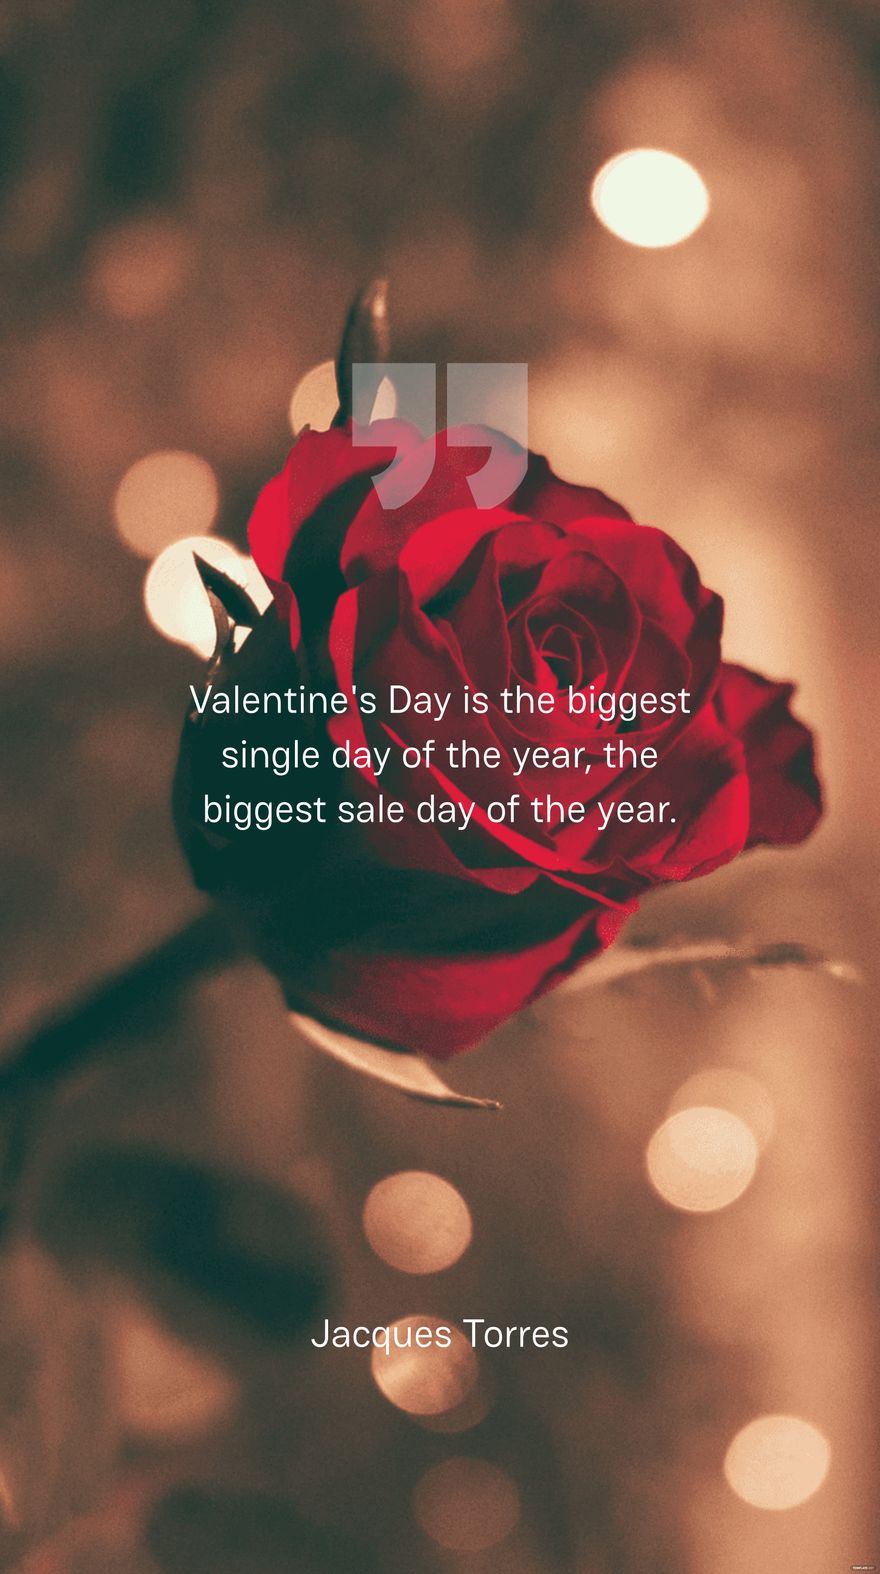 Jacques Torres - Valentine's Day is the biggest single day of the year, the biggest sale day of the year.